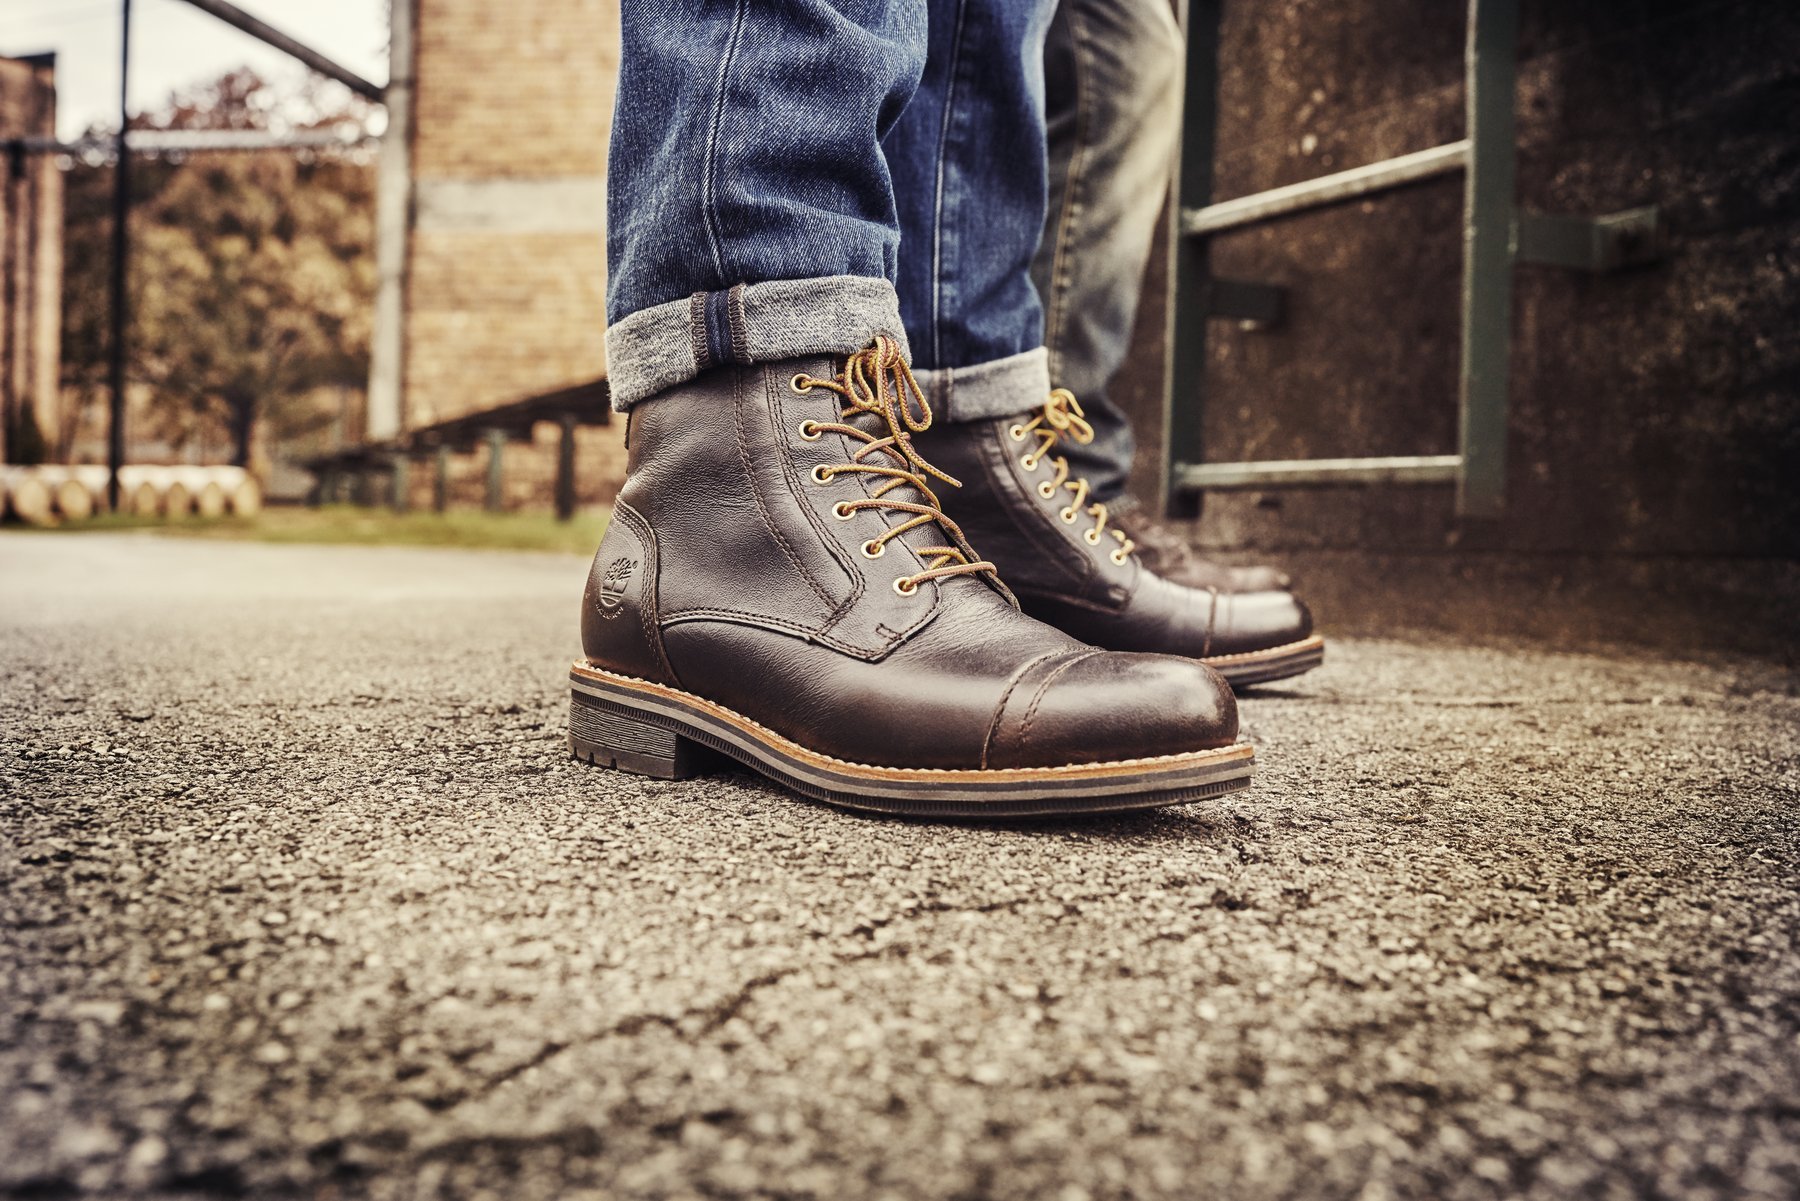 Timberland's Rugged Fall Collection Goes Way Beyond Boots - Maxim